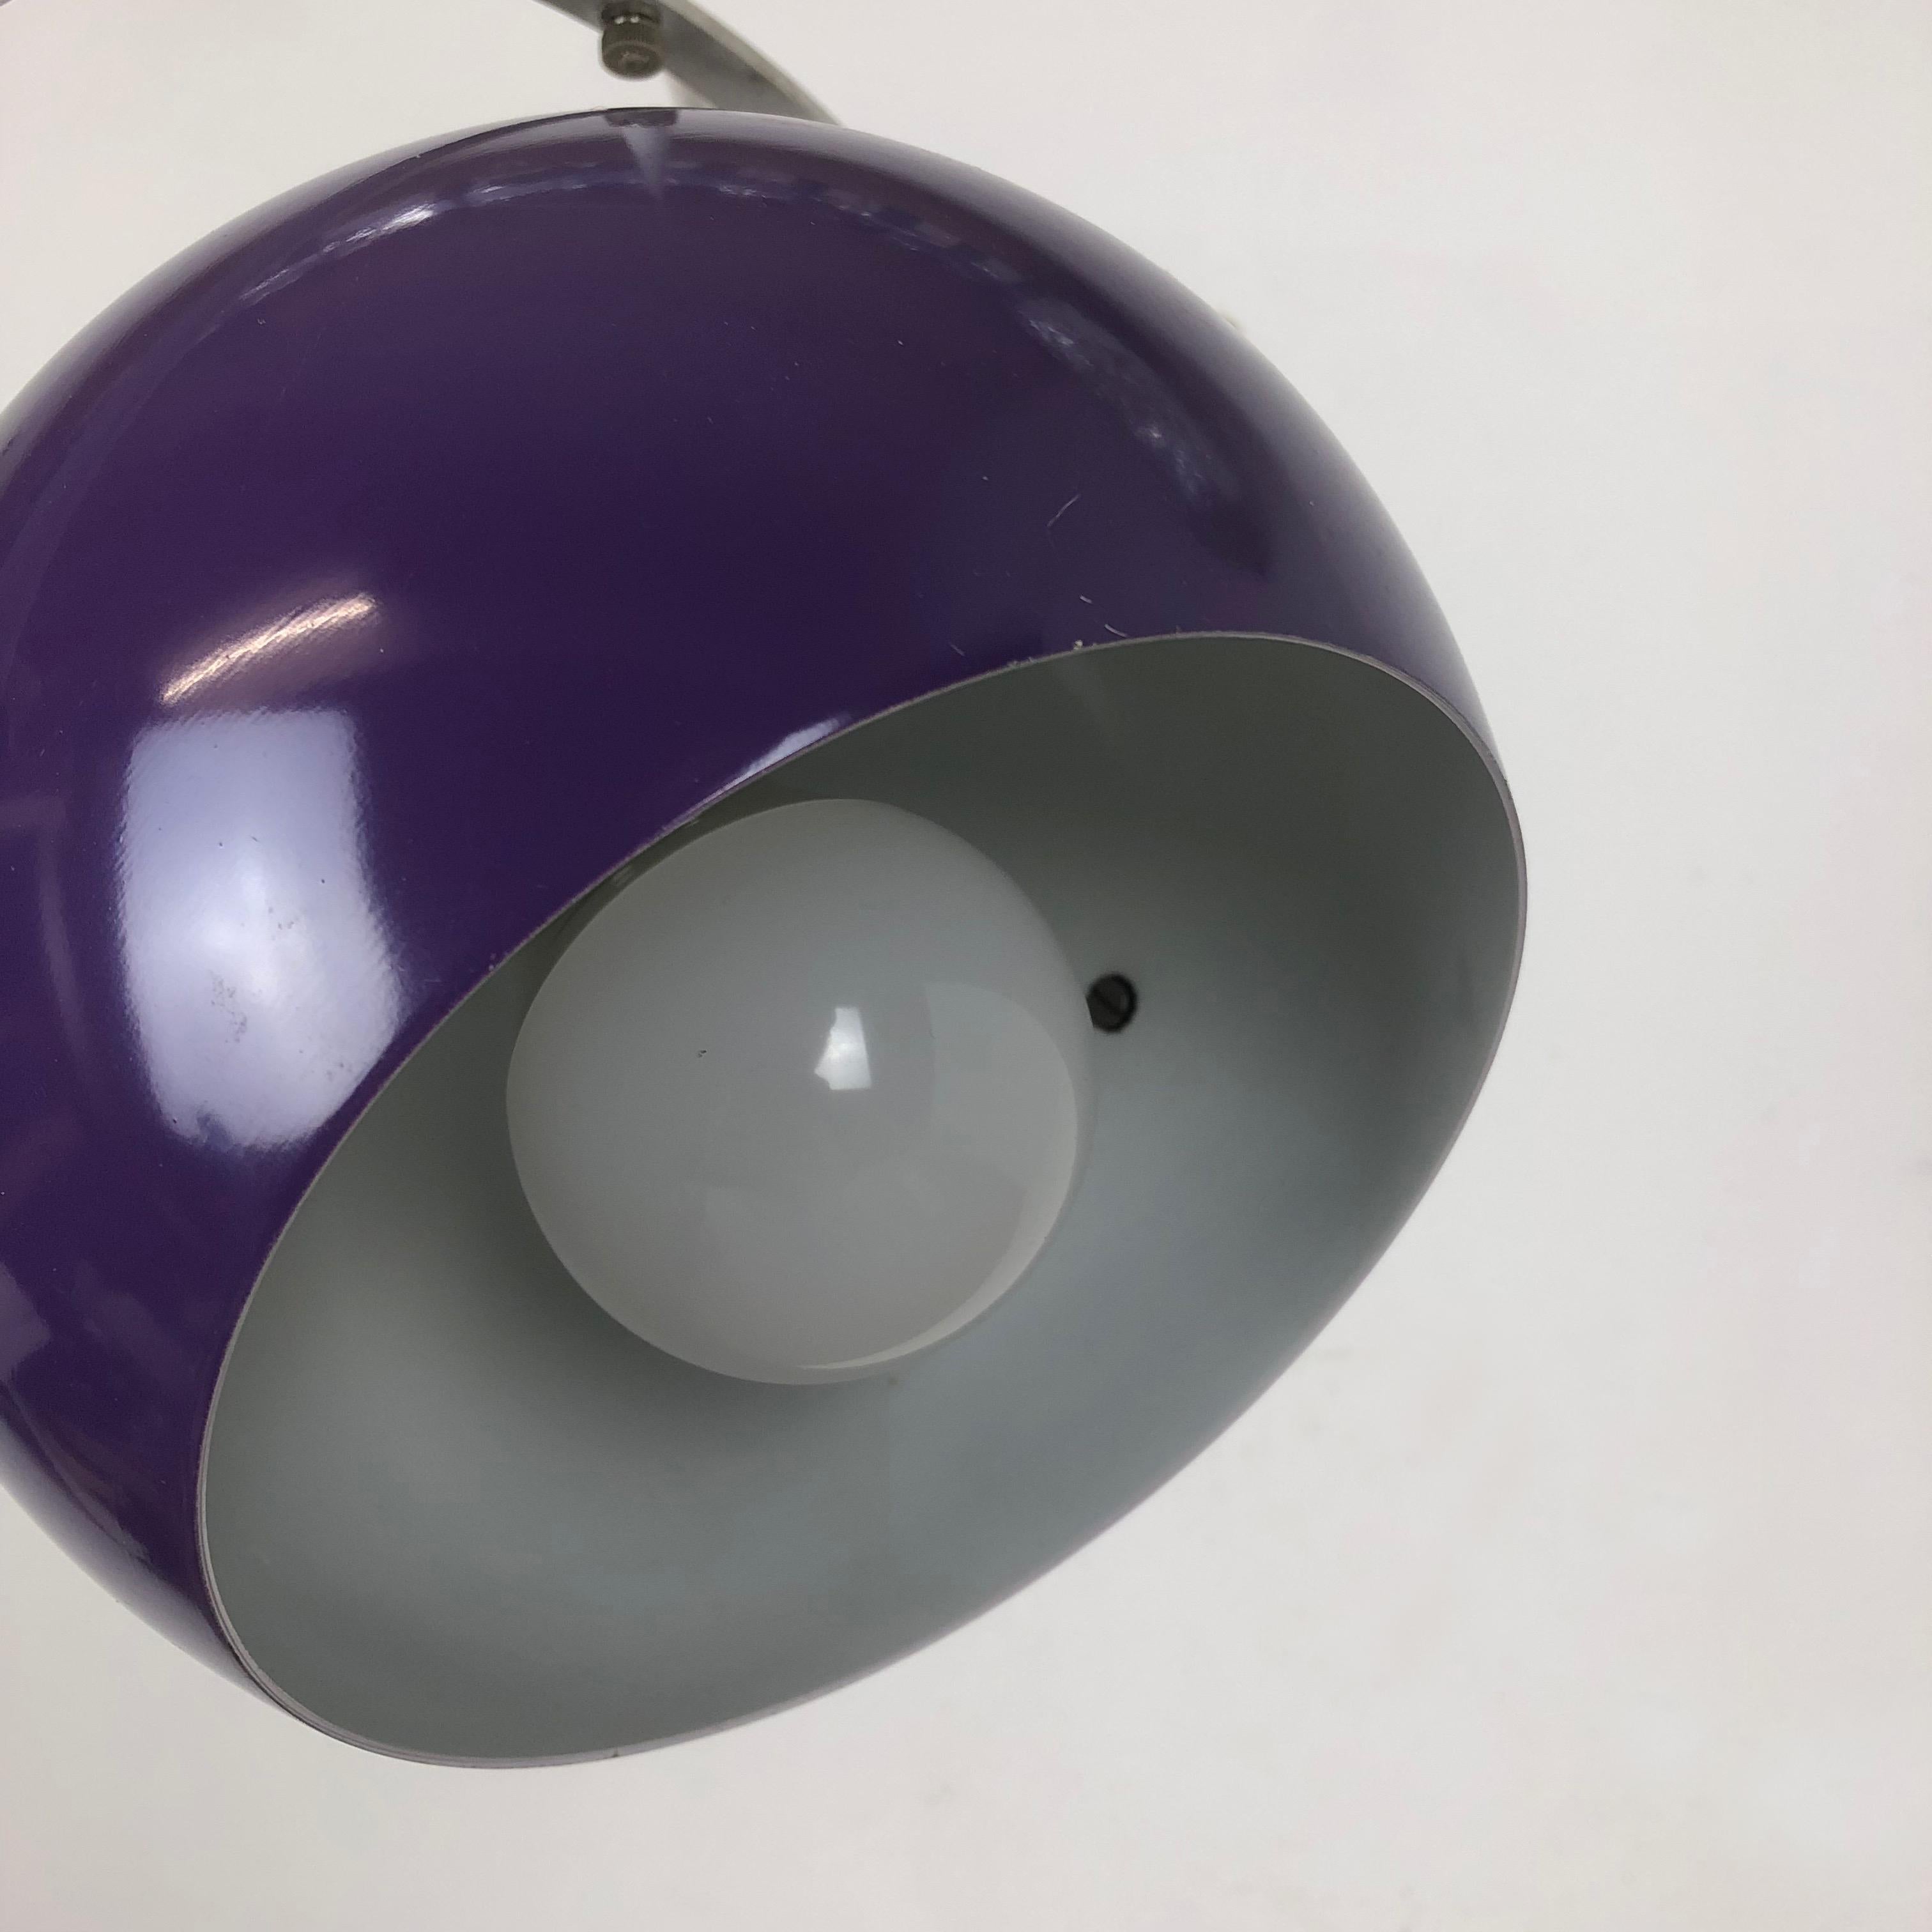 Adjustable Pop Art Panton Style Hanging Light with Purple Spot, Germany, 1970s For Sale 1